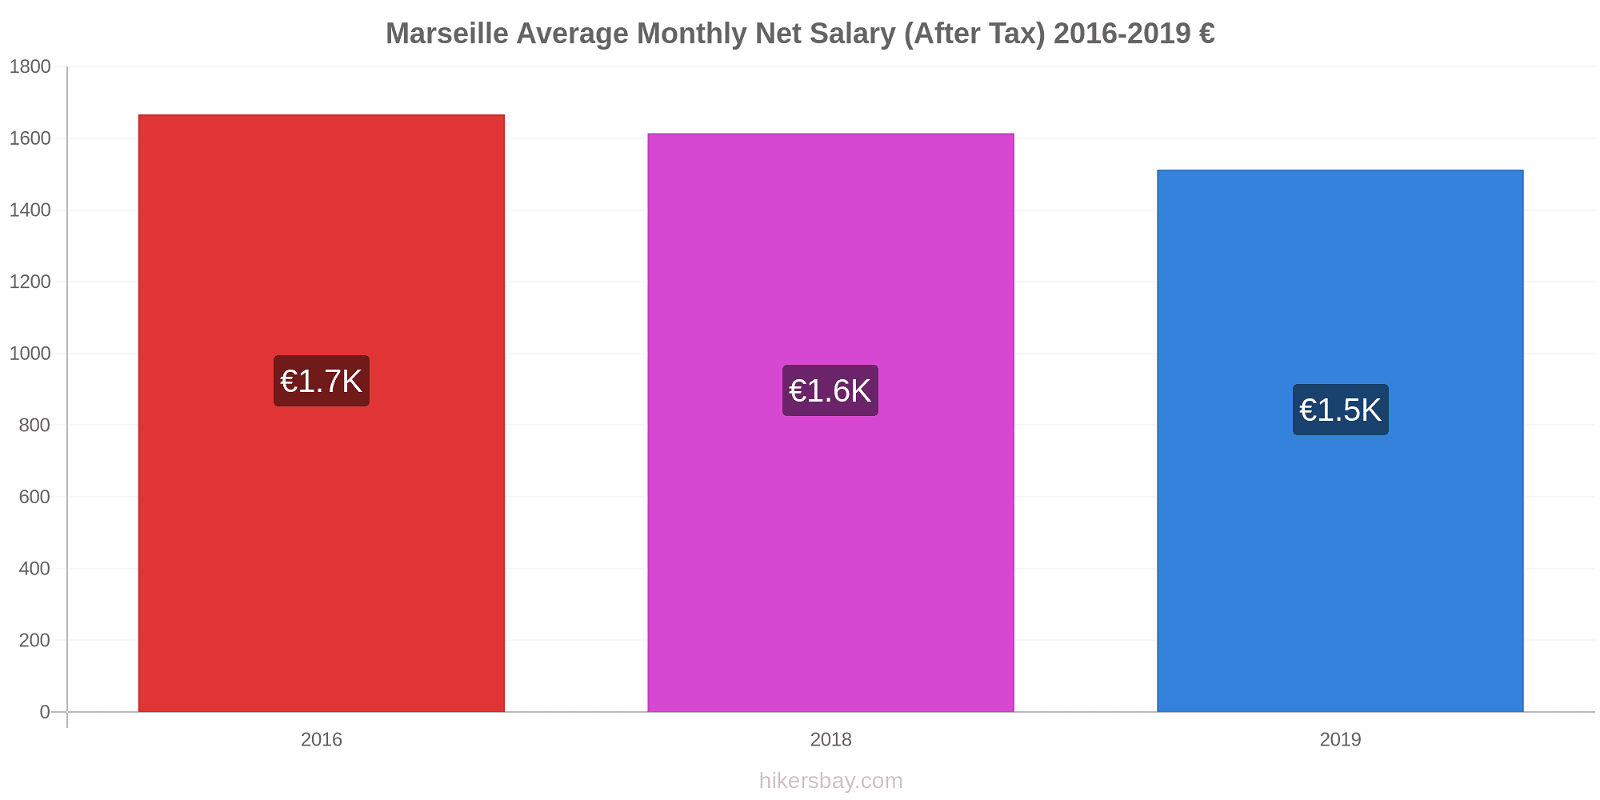 Marseille price changes Average Monthly Net Salary (After Tax) hikersbay.com